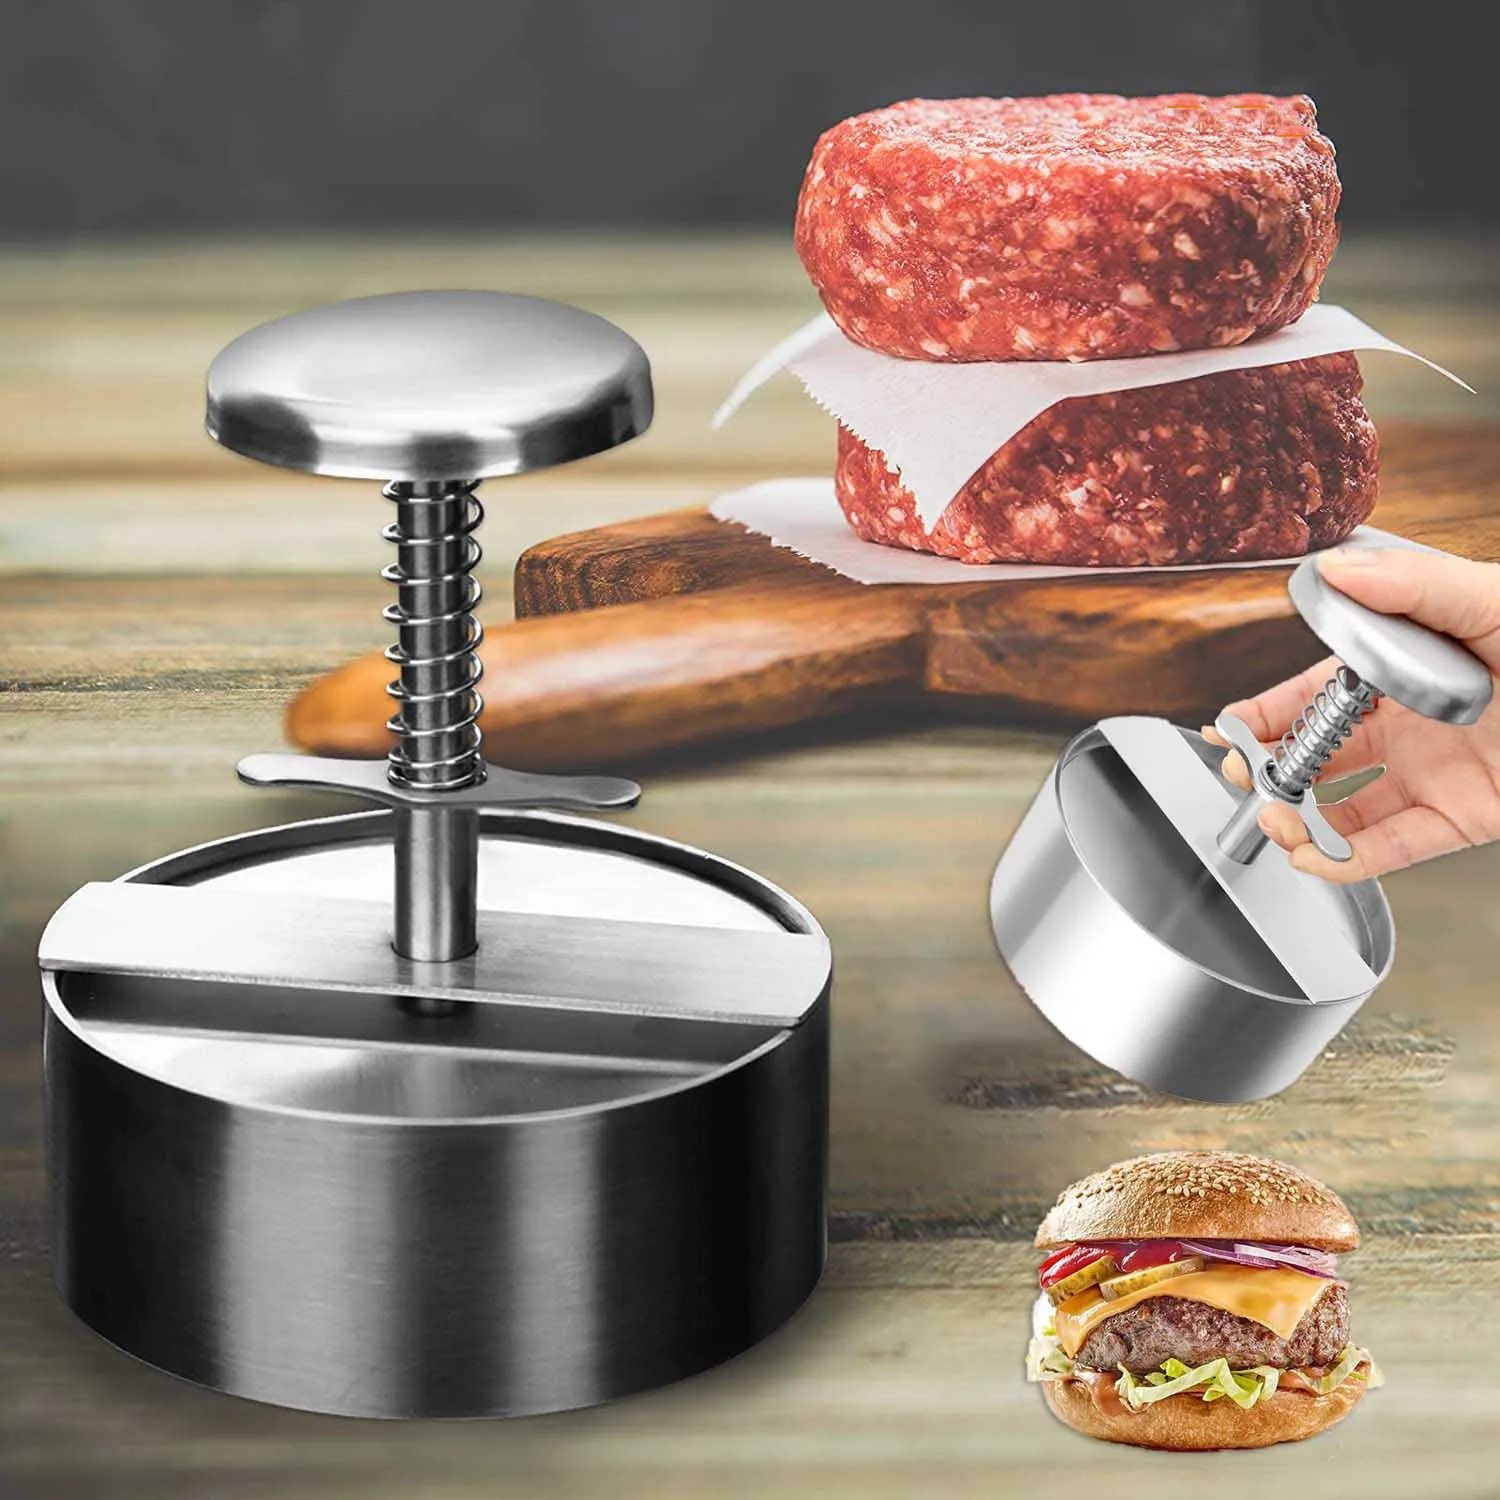 Hamburger Press Burger Patty Maker 304 Stainless Steel Pork Beef Cutlet Burgers Manual Press Mold for Grill Griddle Meat Tool